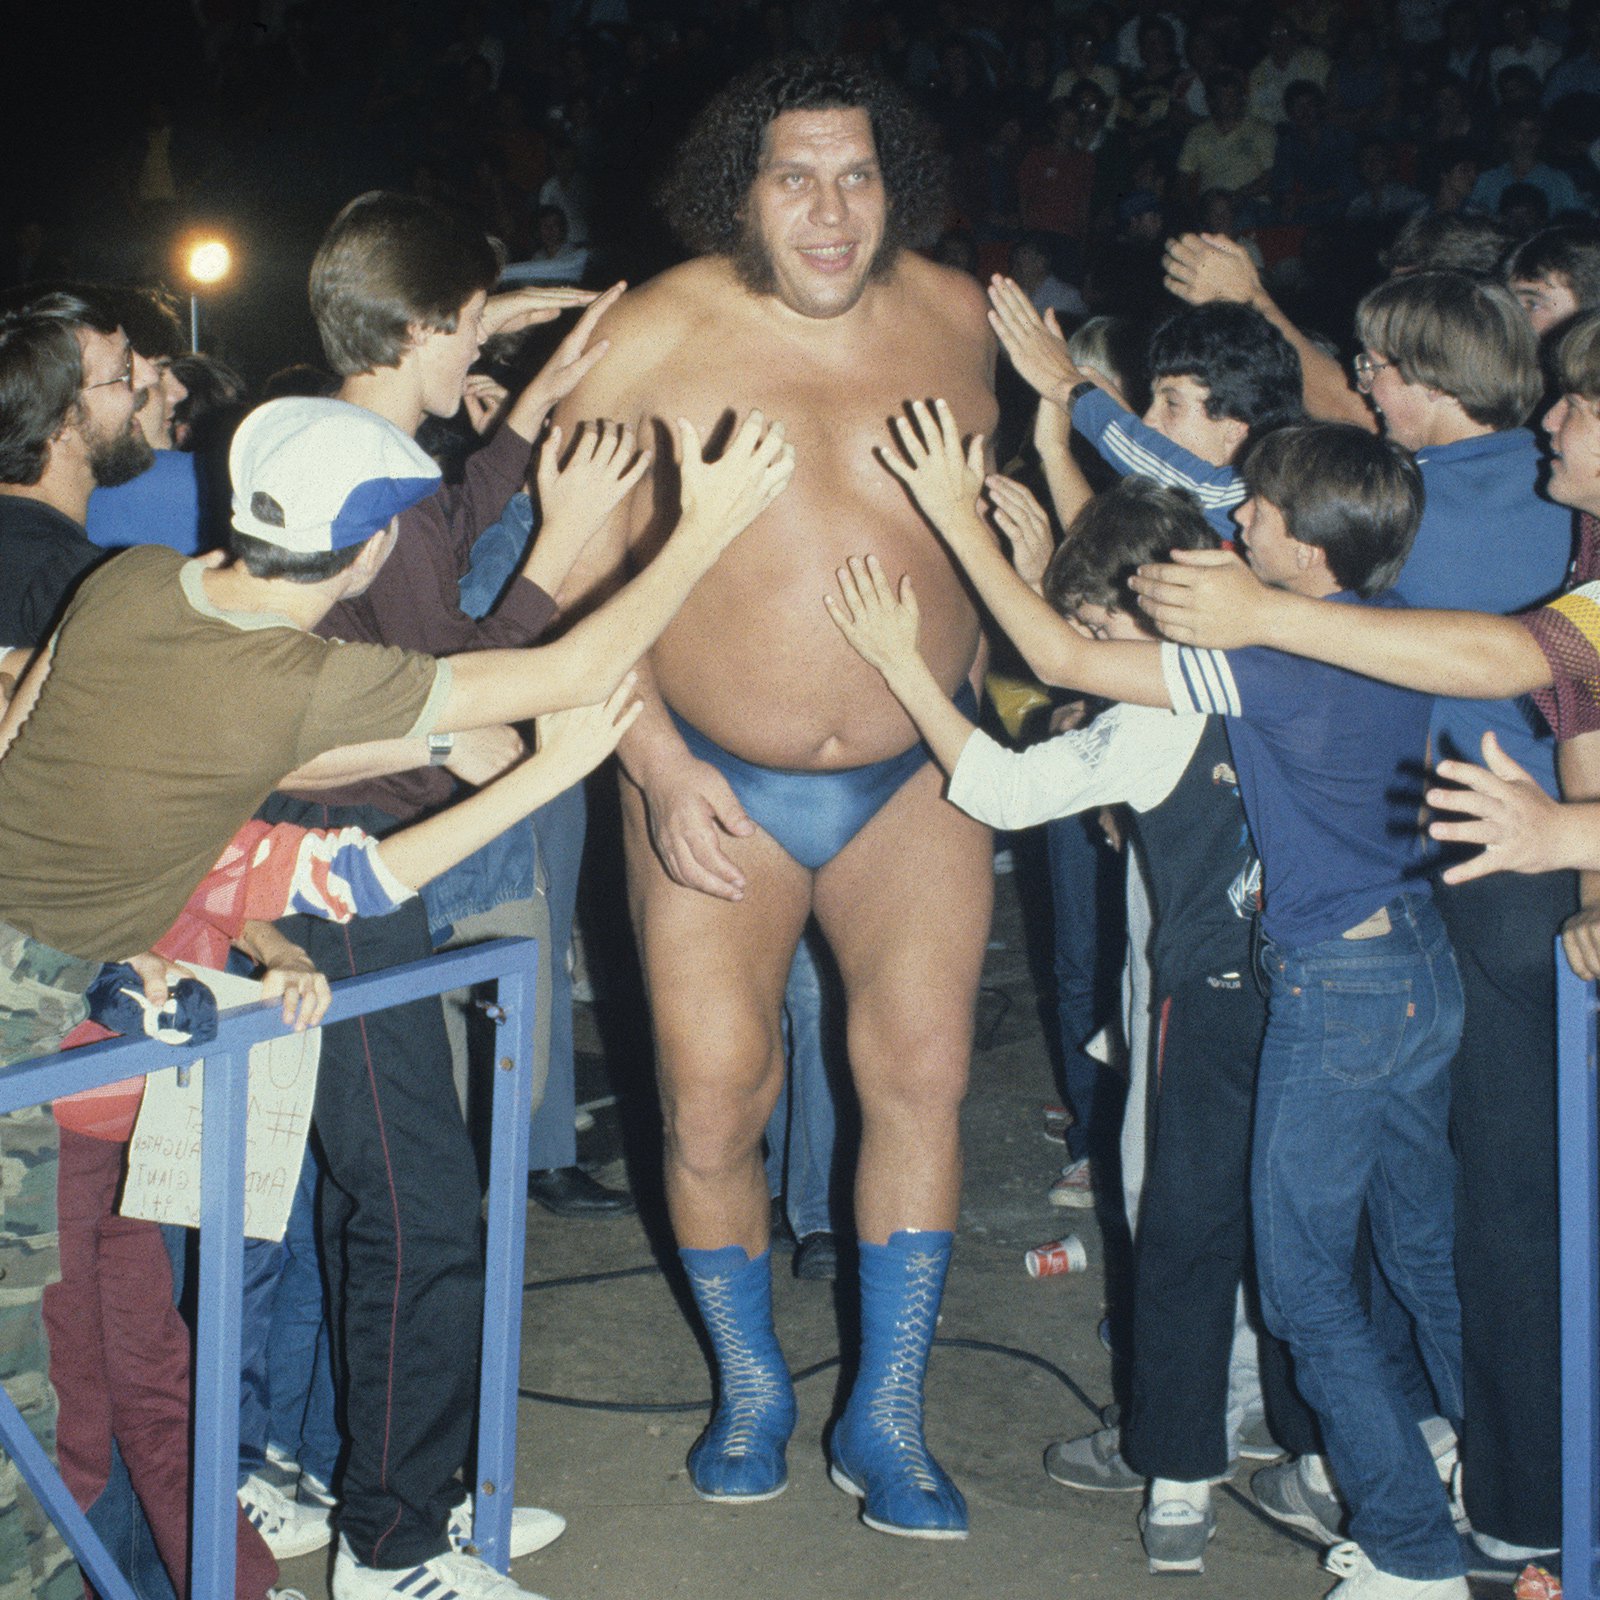 Andre the giant on atv